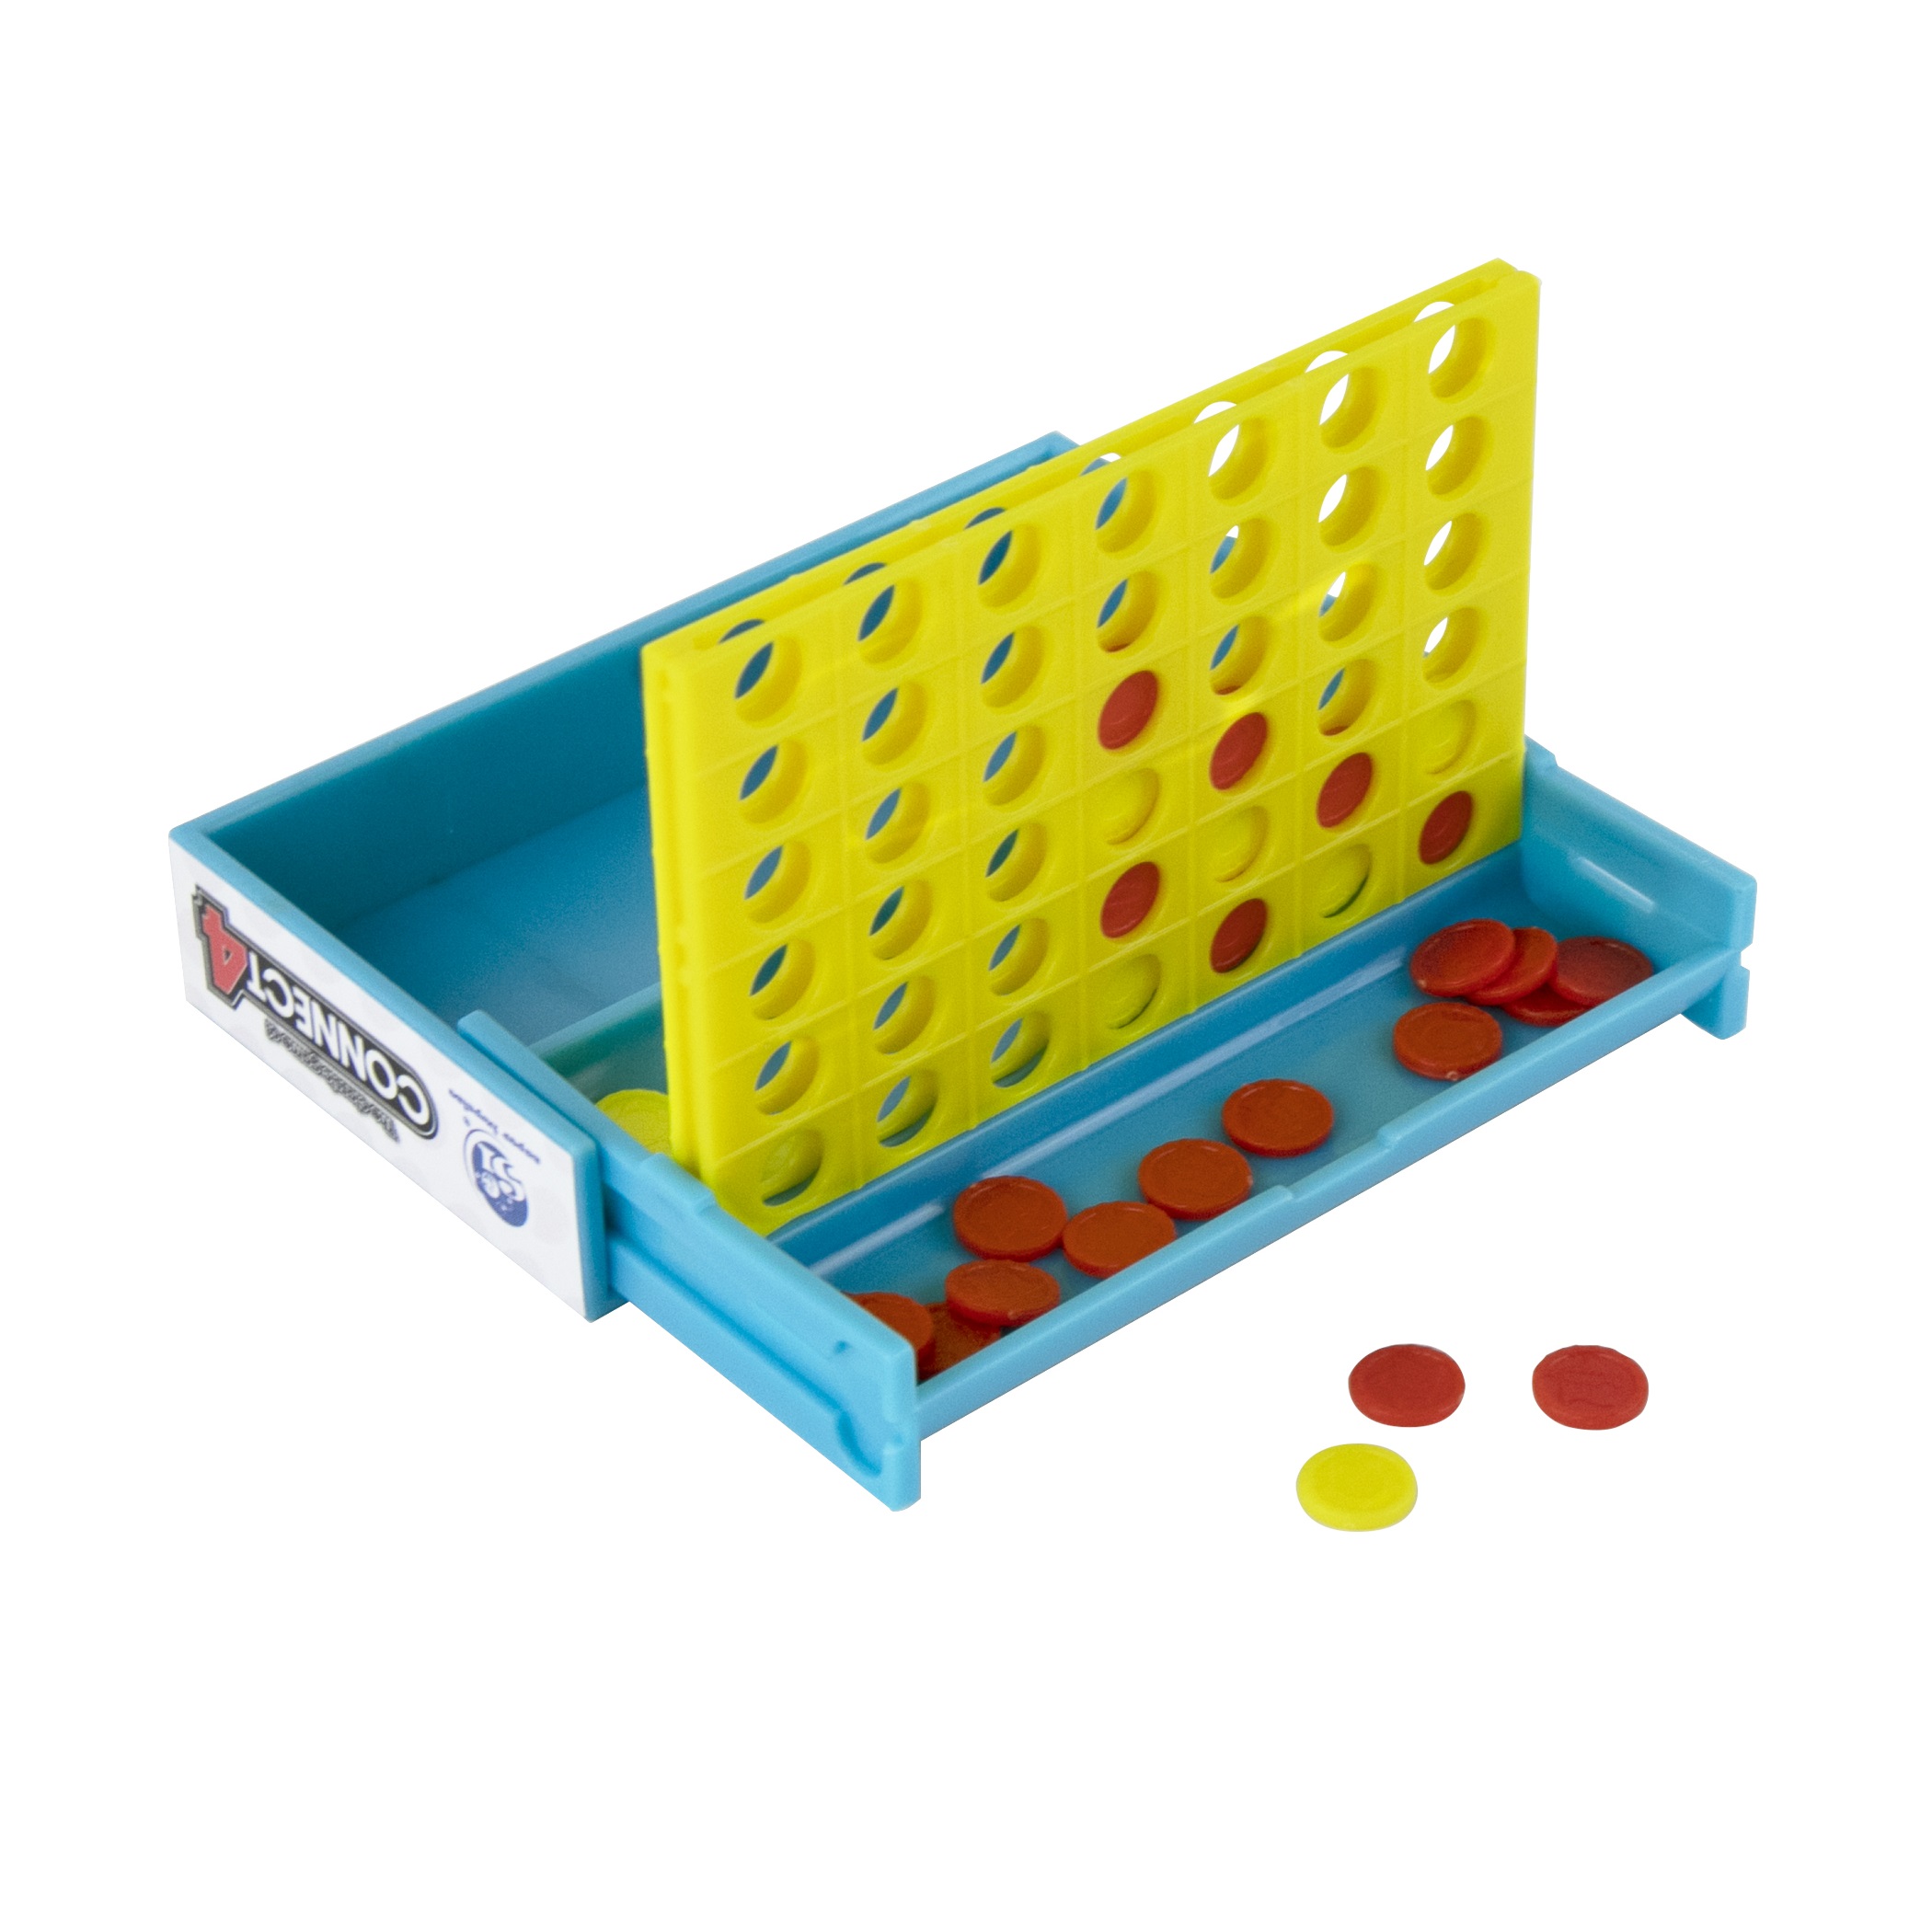 MINI LINE UP 4 GAME CONNECT 4 MINI VERSION BUY 2 PACKS GET 1 PACK FREE 